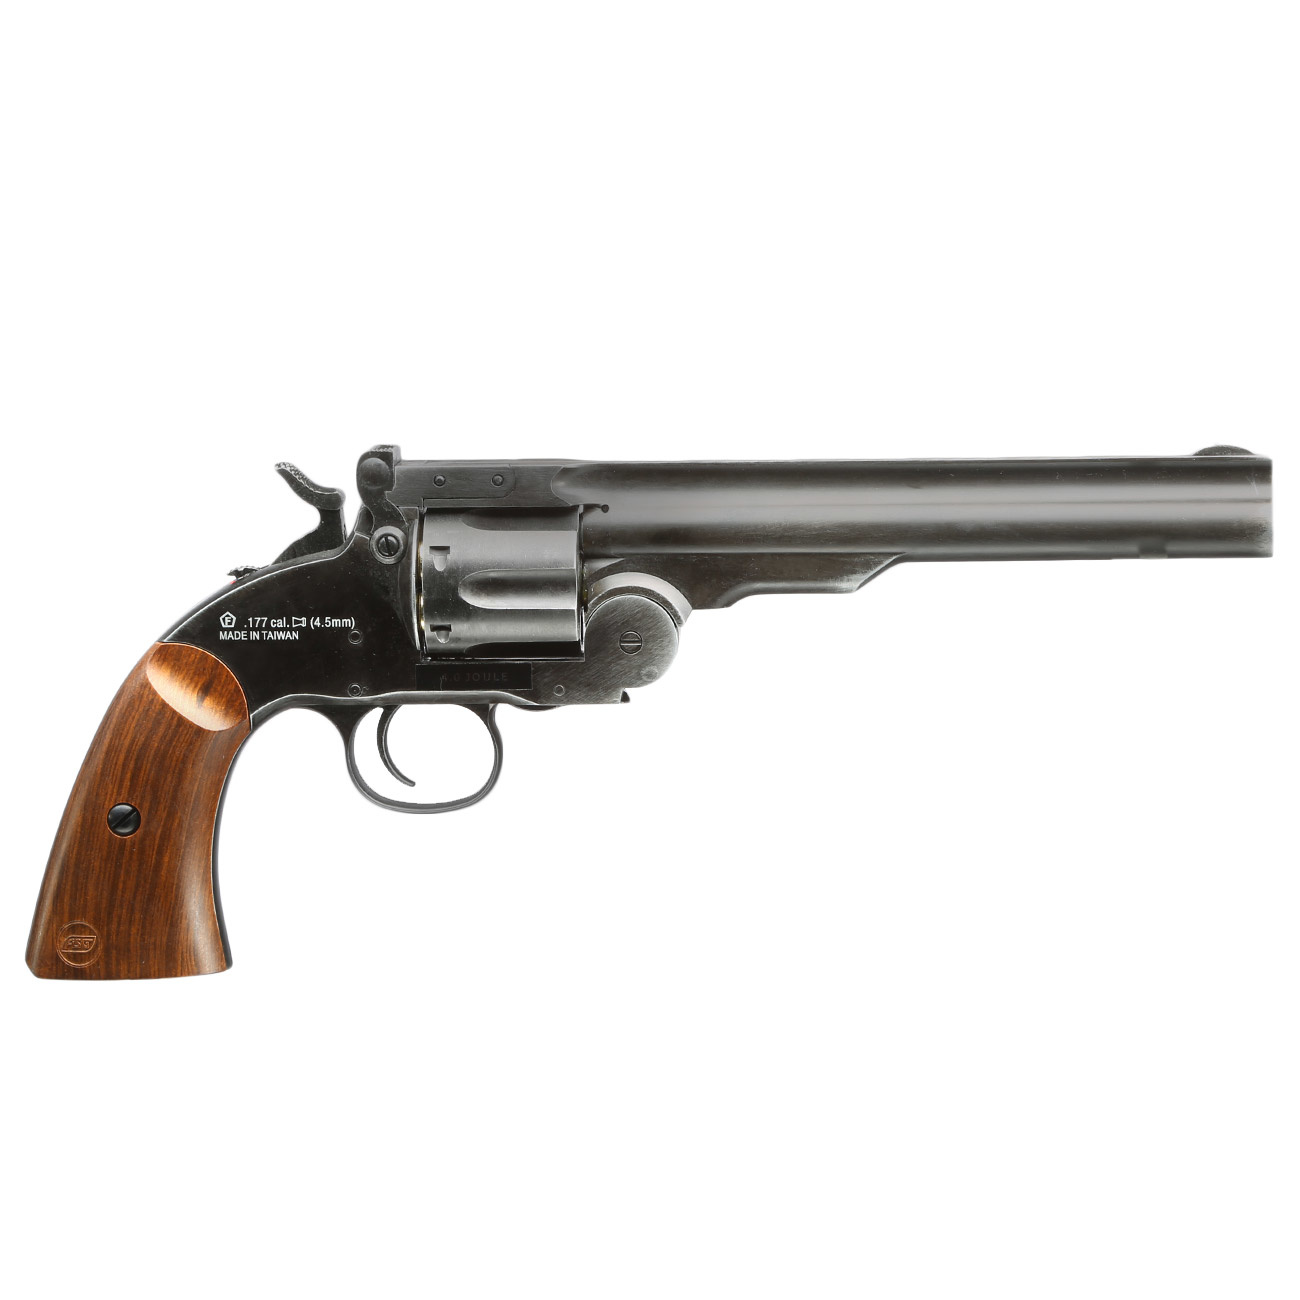 ASG 6 inch Schofield Co2 Revolver NBB 2.0 Joule - BK/Wooden look